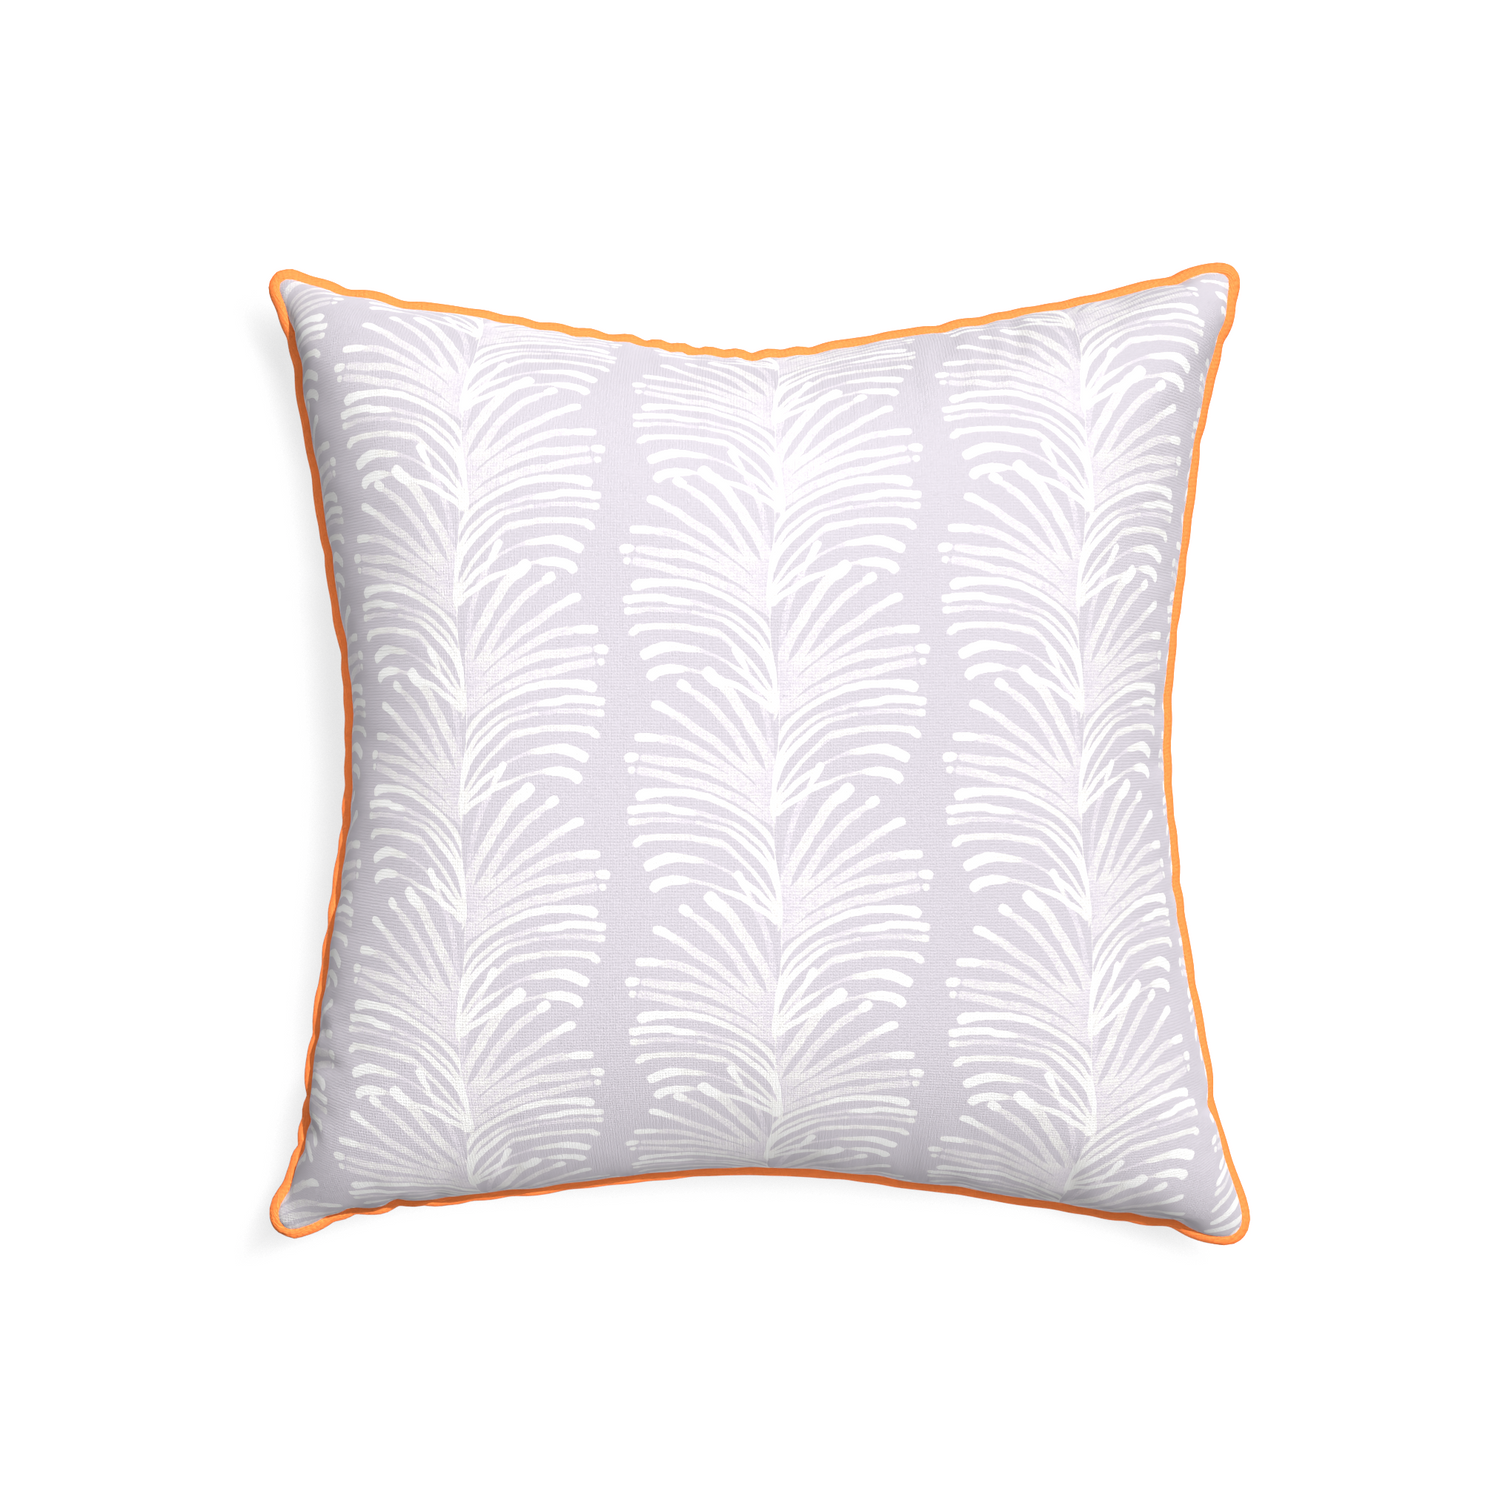 22-square emma lavender custom lavender botanical stripepillow with clementine piping on white background